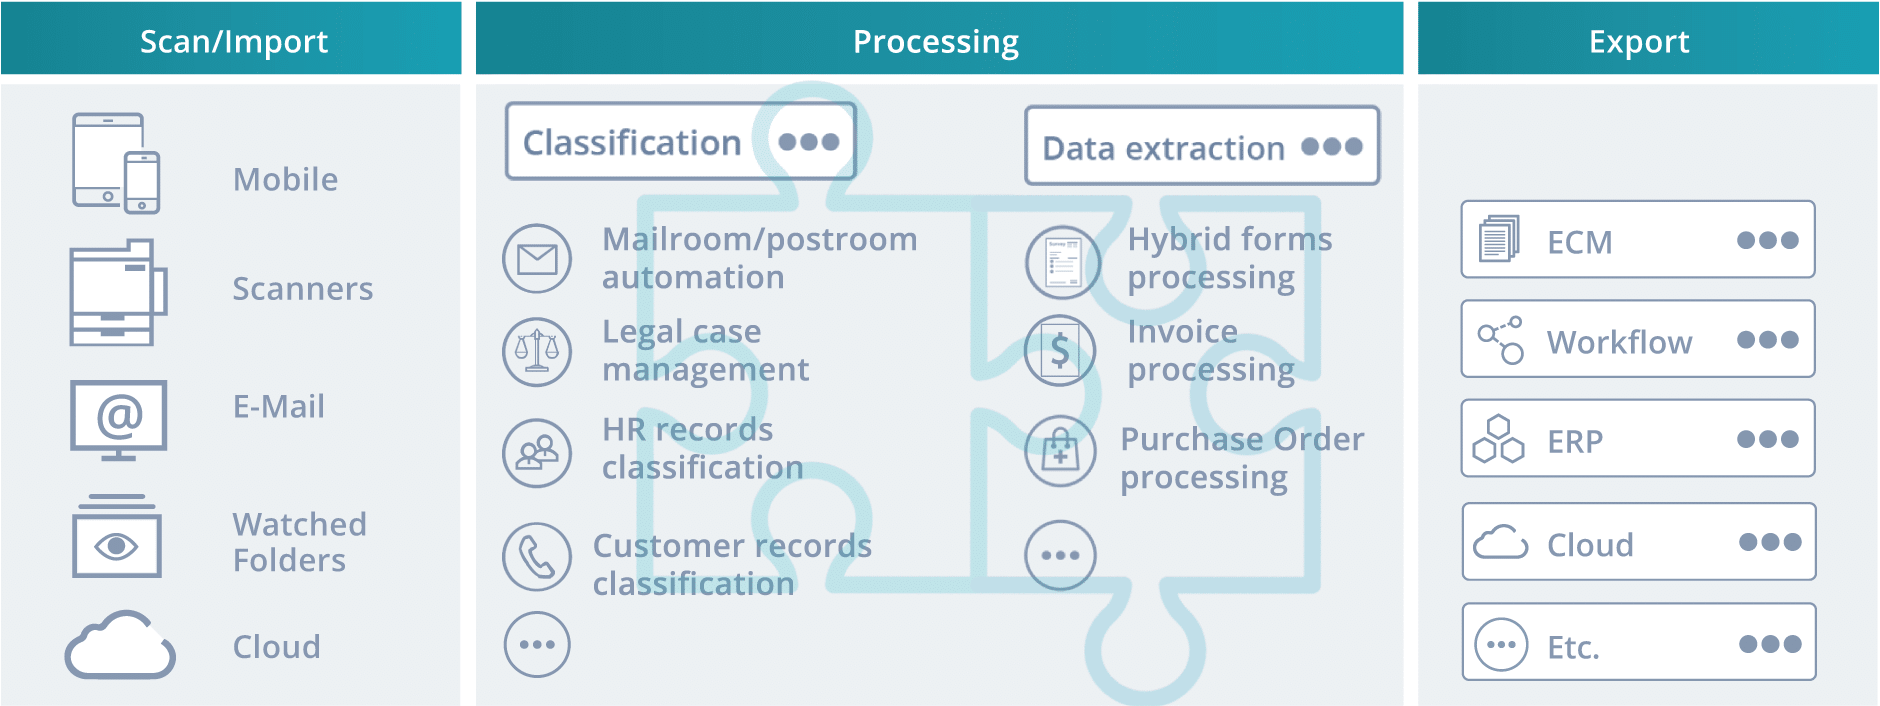 How does the IRISXtract for Documents software work? You can import documents via scan clients, electronic files, e-mail or cloud. The the software classifies the documents and/or extracts data it in a digital mailroom or business process solution (Mailroom/postroom automation, Legal Case management, HR records classification, Customer records classification, Invoice processing, hybrid forms processing, purchase order processing ..) You can then export the data and documents to your ECM, Workflow, ERP or Cloud system. IRISXtract helps you move towards a paperless office.